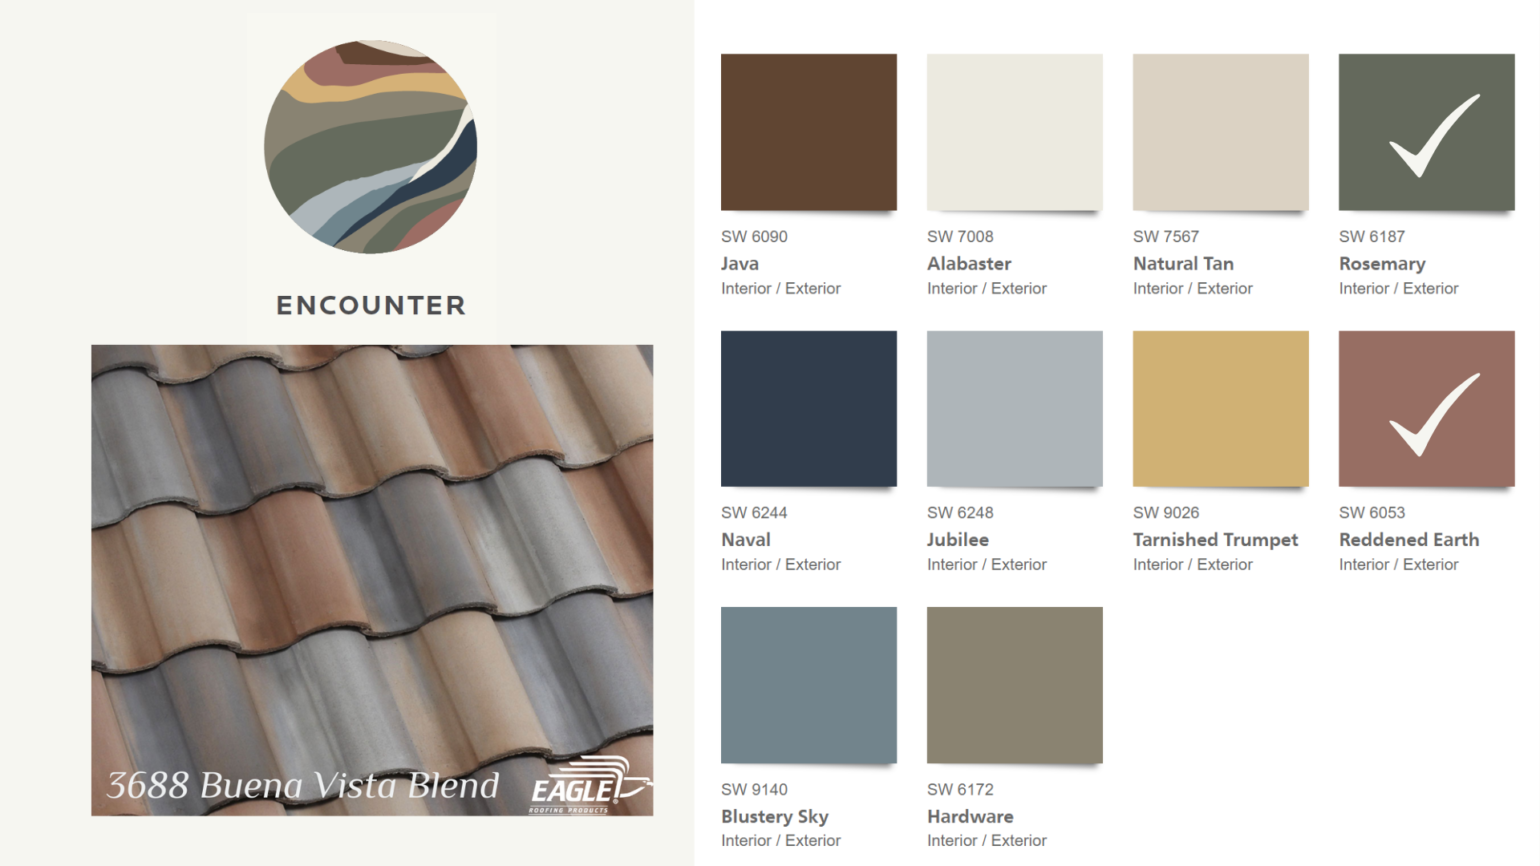 Concrete Roof Tiles to Pair with Sherwin Williams 2021 Color Trends